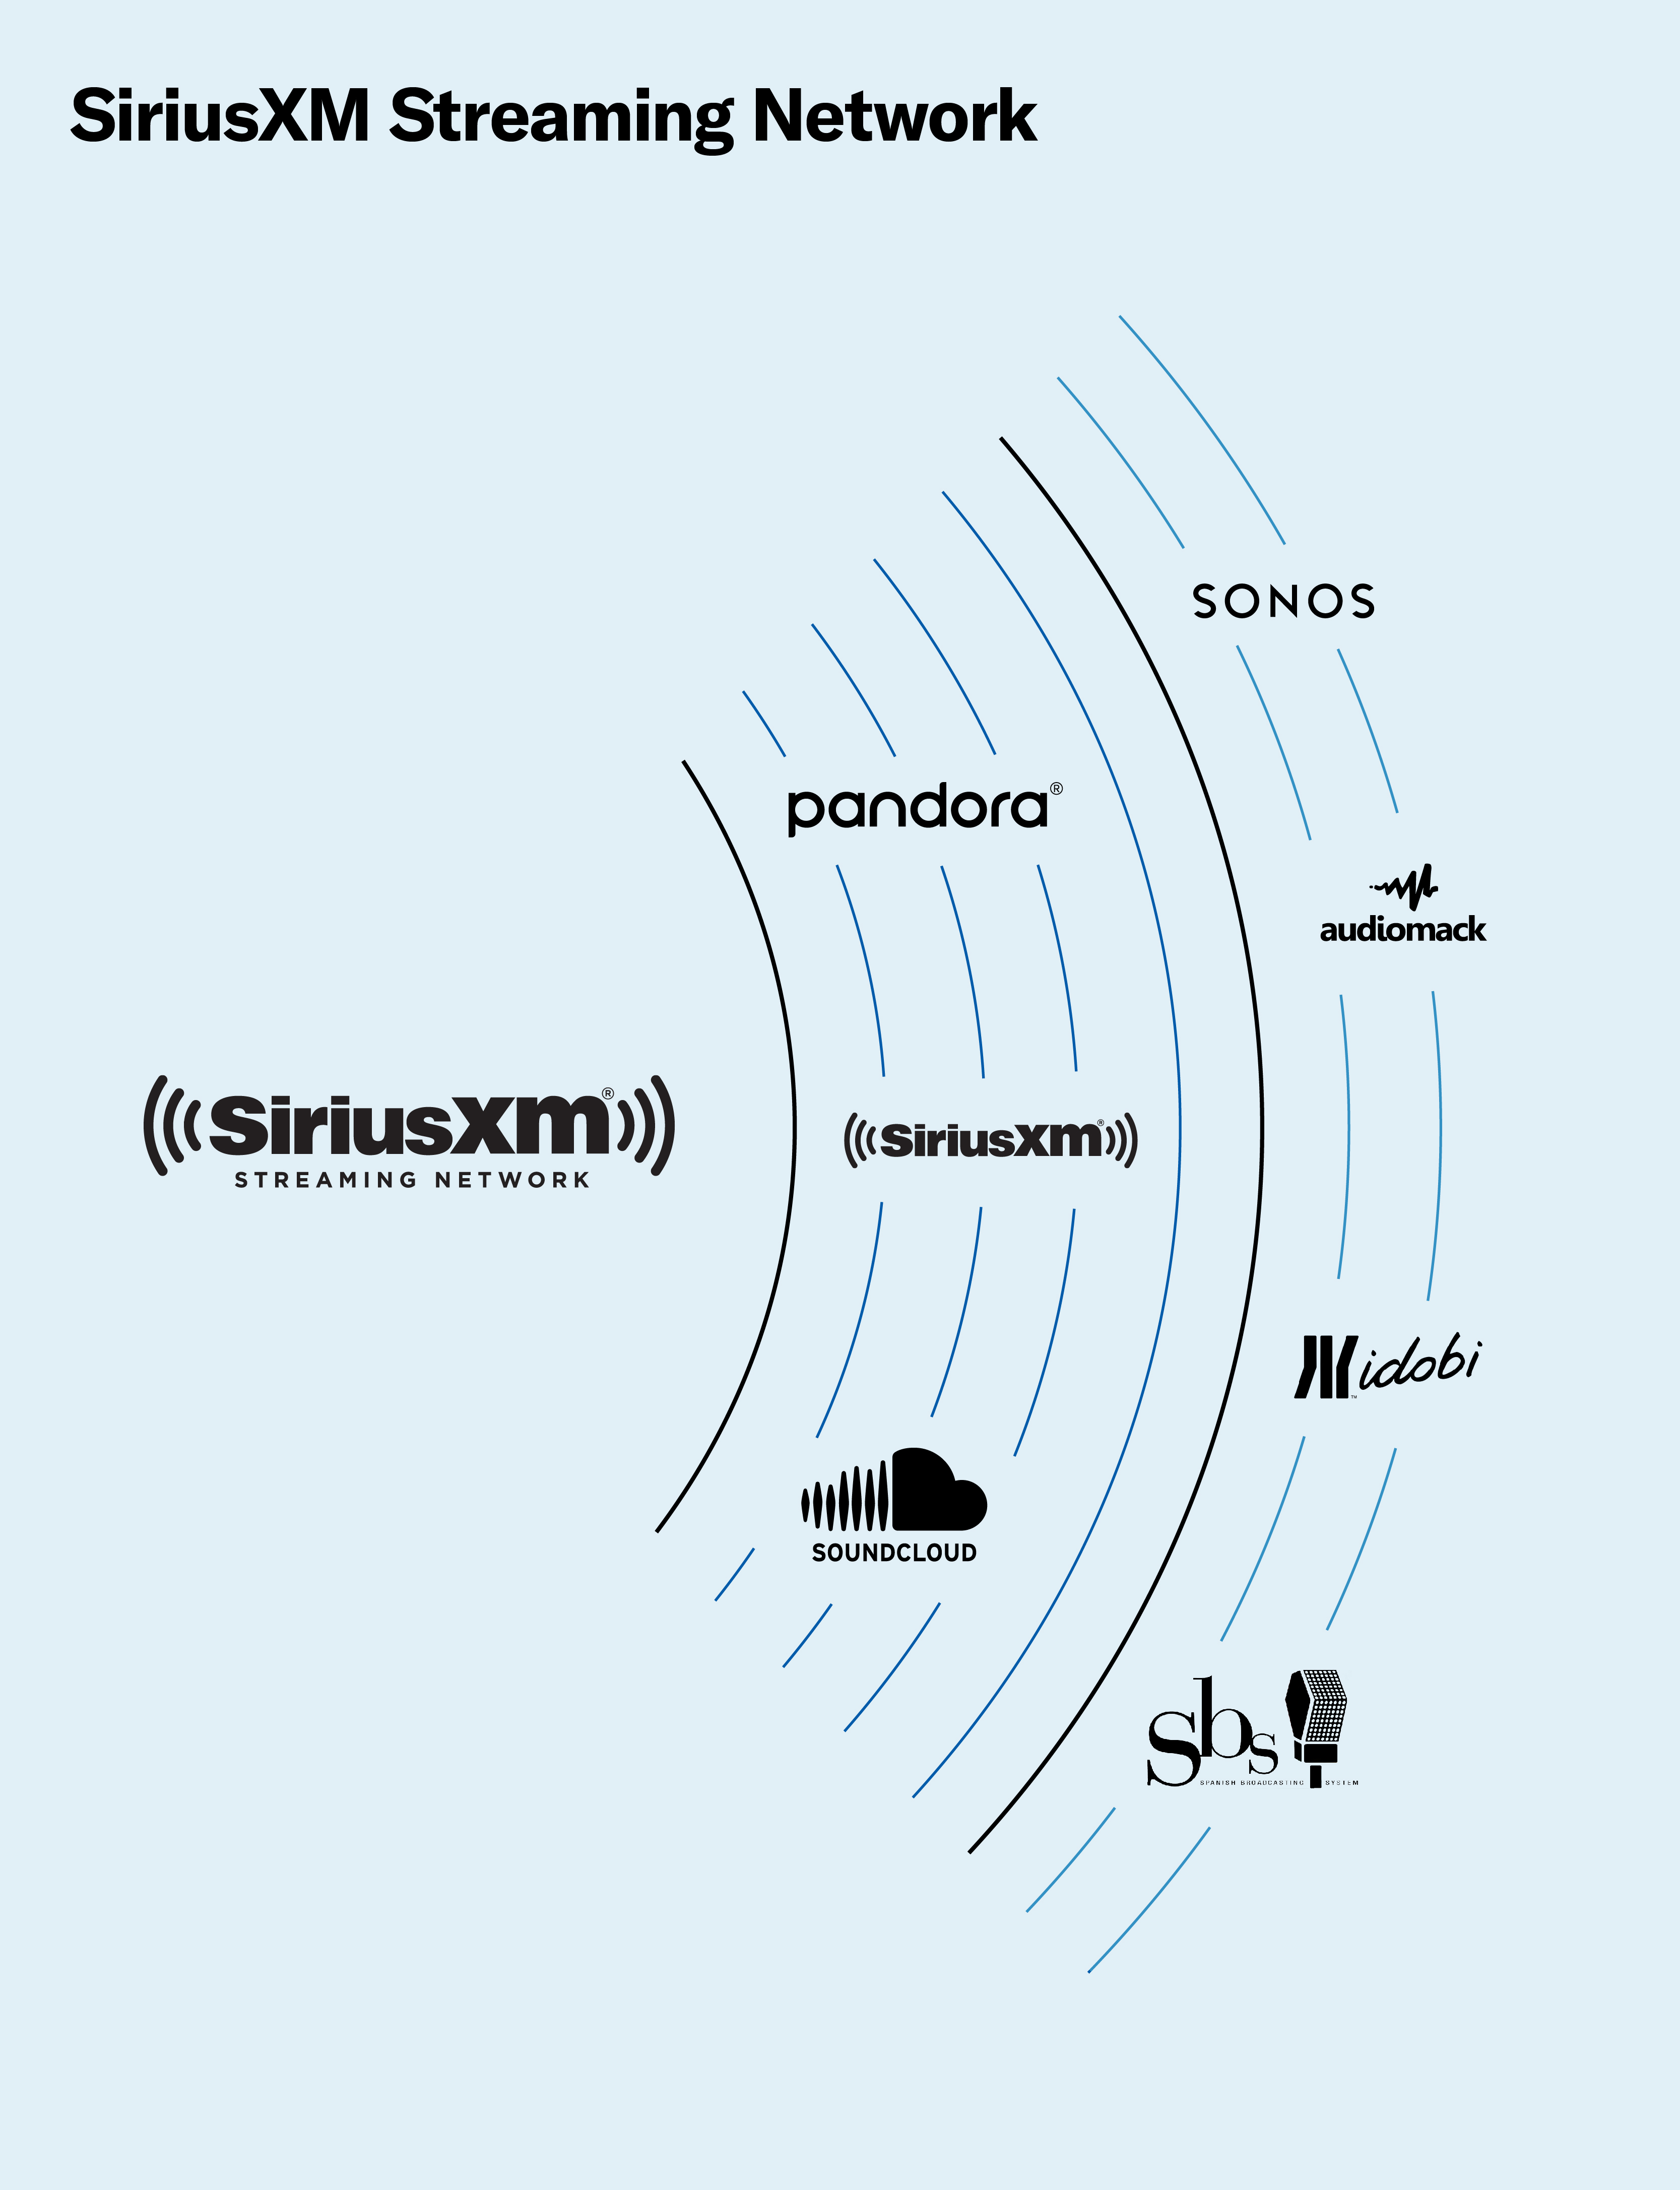 The SiriusXM Streaming Network is a game-changing powerhouse